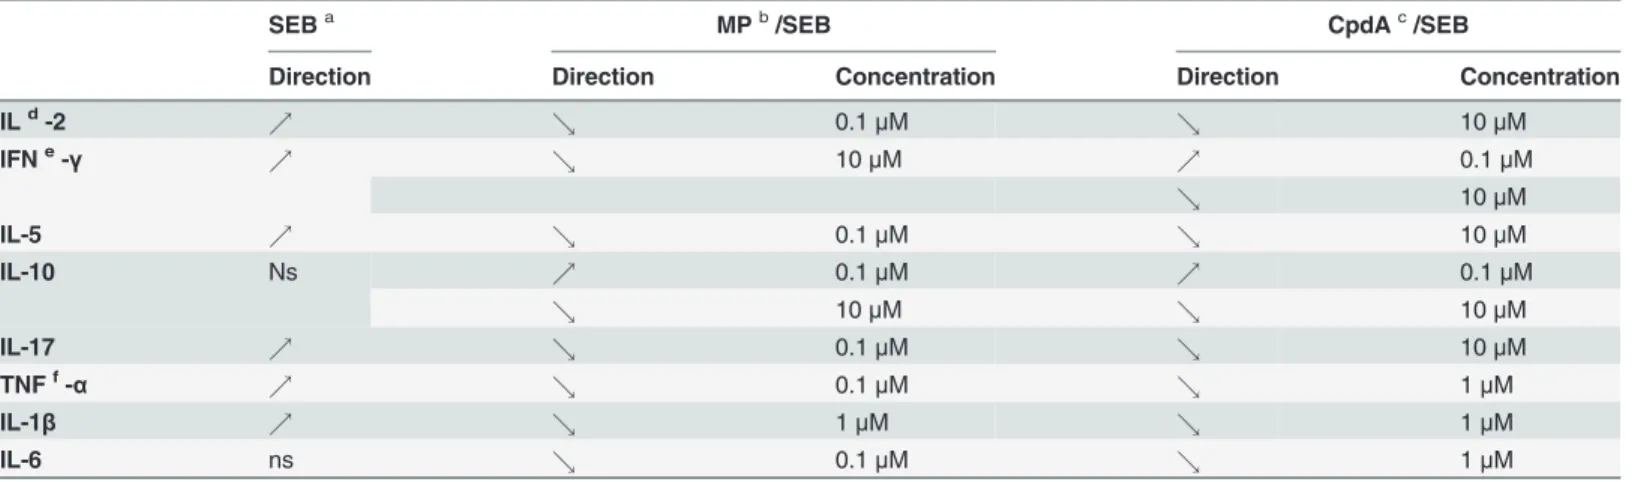 Table 1. Summary of the significant effects of the selective GR modulator compound A and the glucocorticoid methylprednisolone on PBMCs.